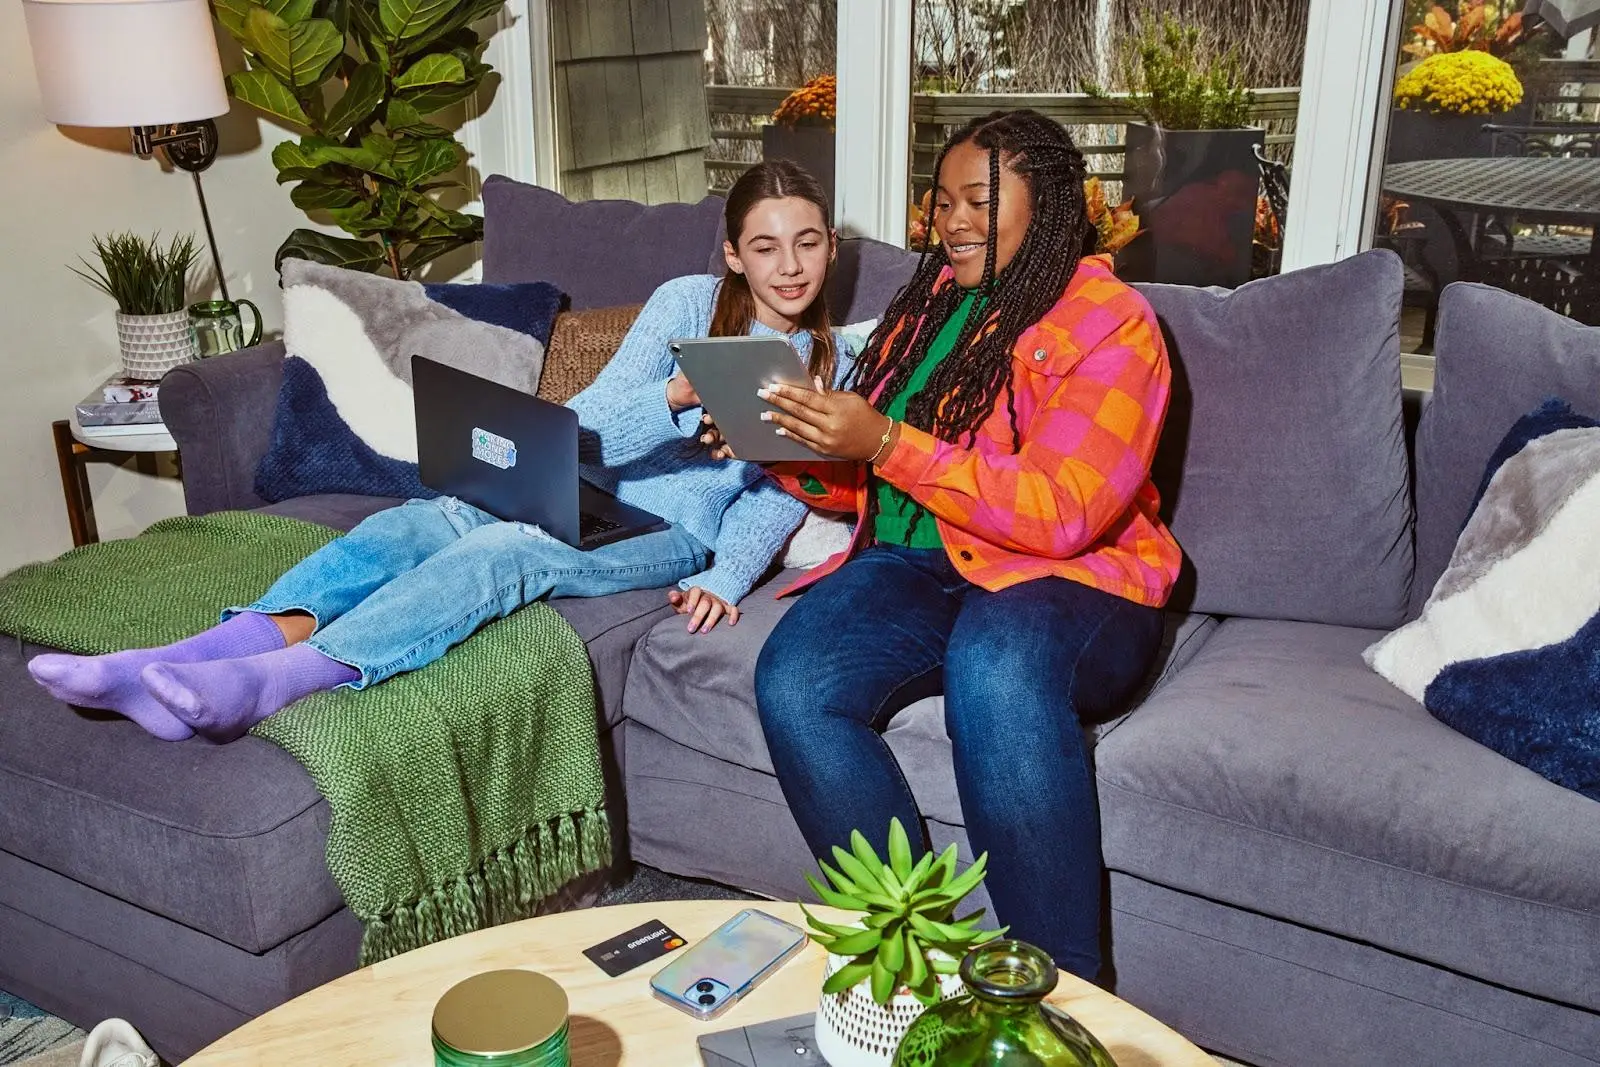 Two girls on a couch with a tablet and a computer chatting.